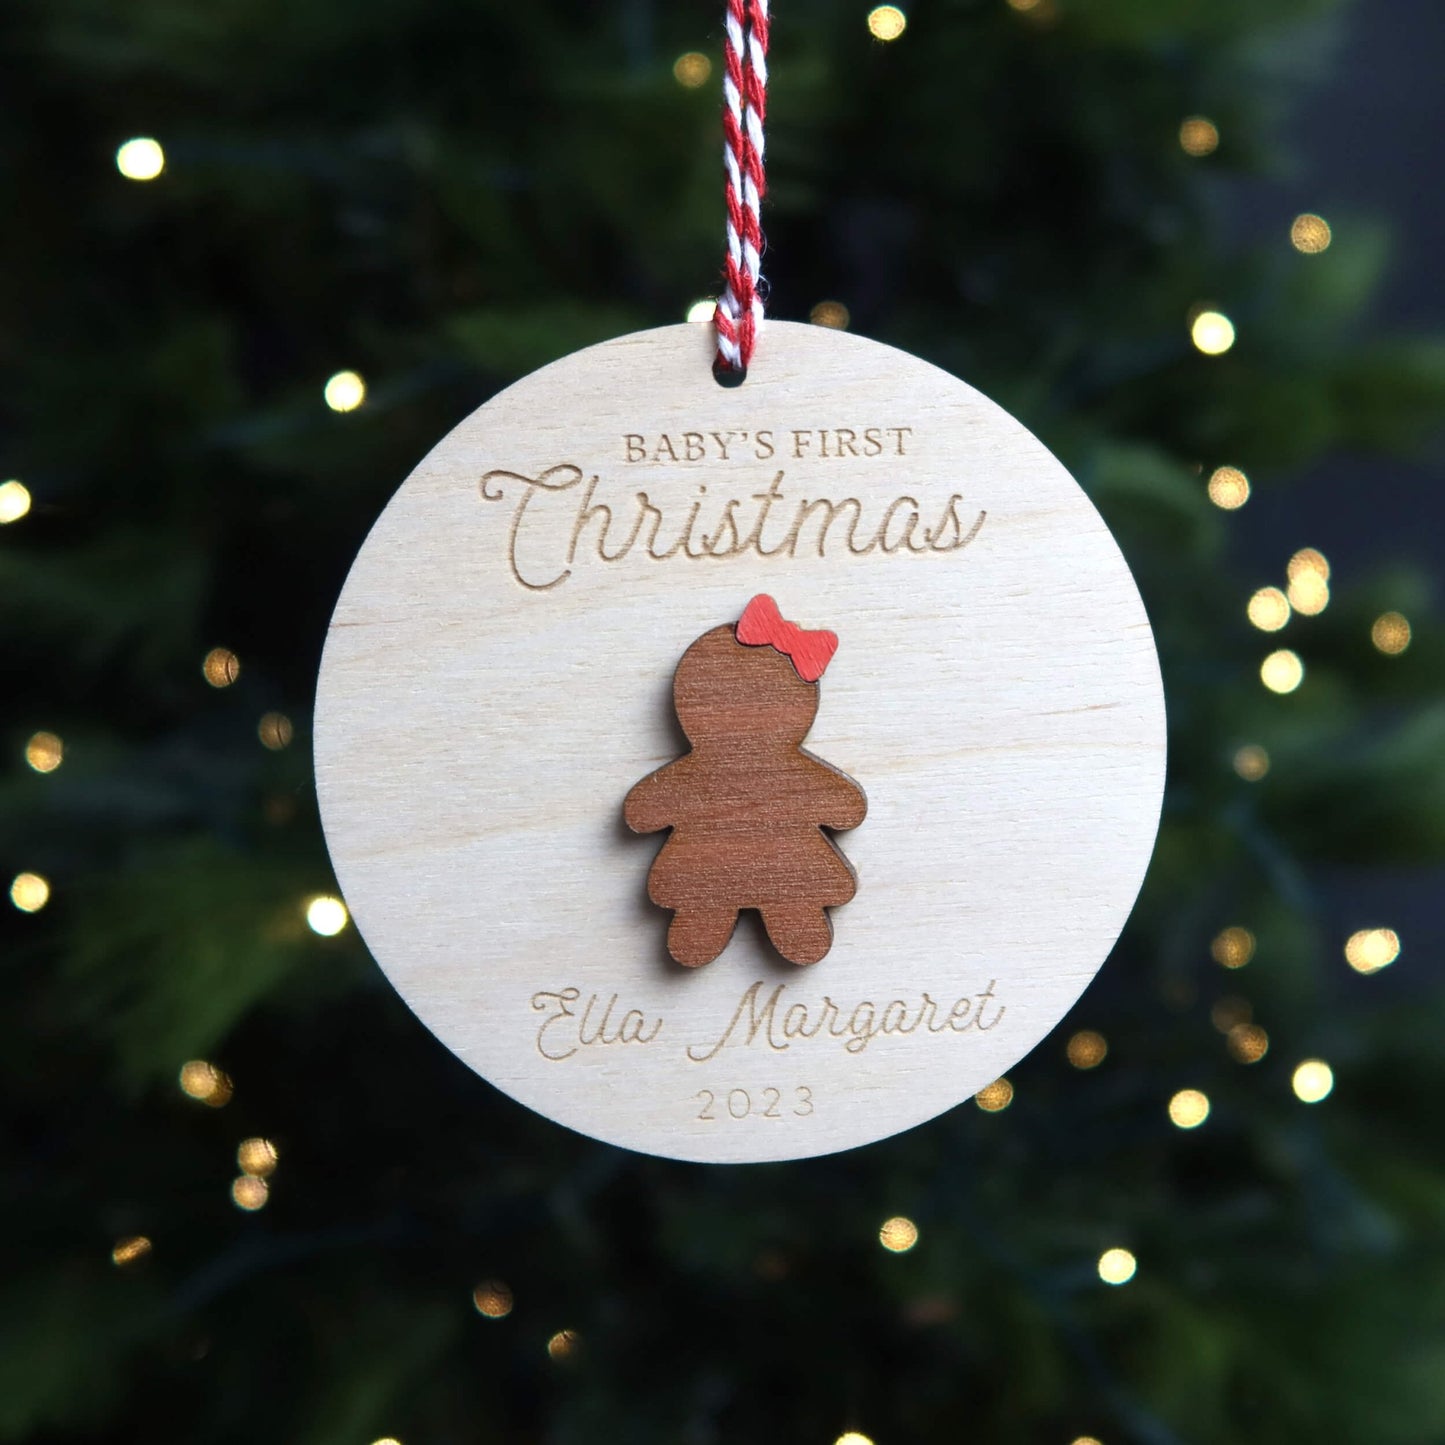 Gingerbread Girl Baby's First Christmas Ornament Personalized - Holiday Ornaments - Moon Rock Prints